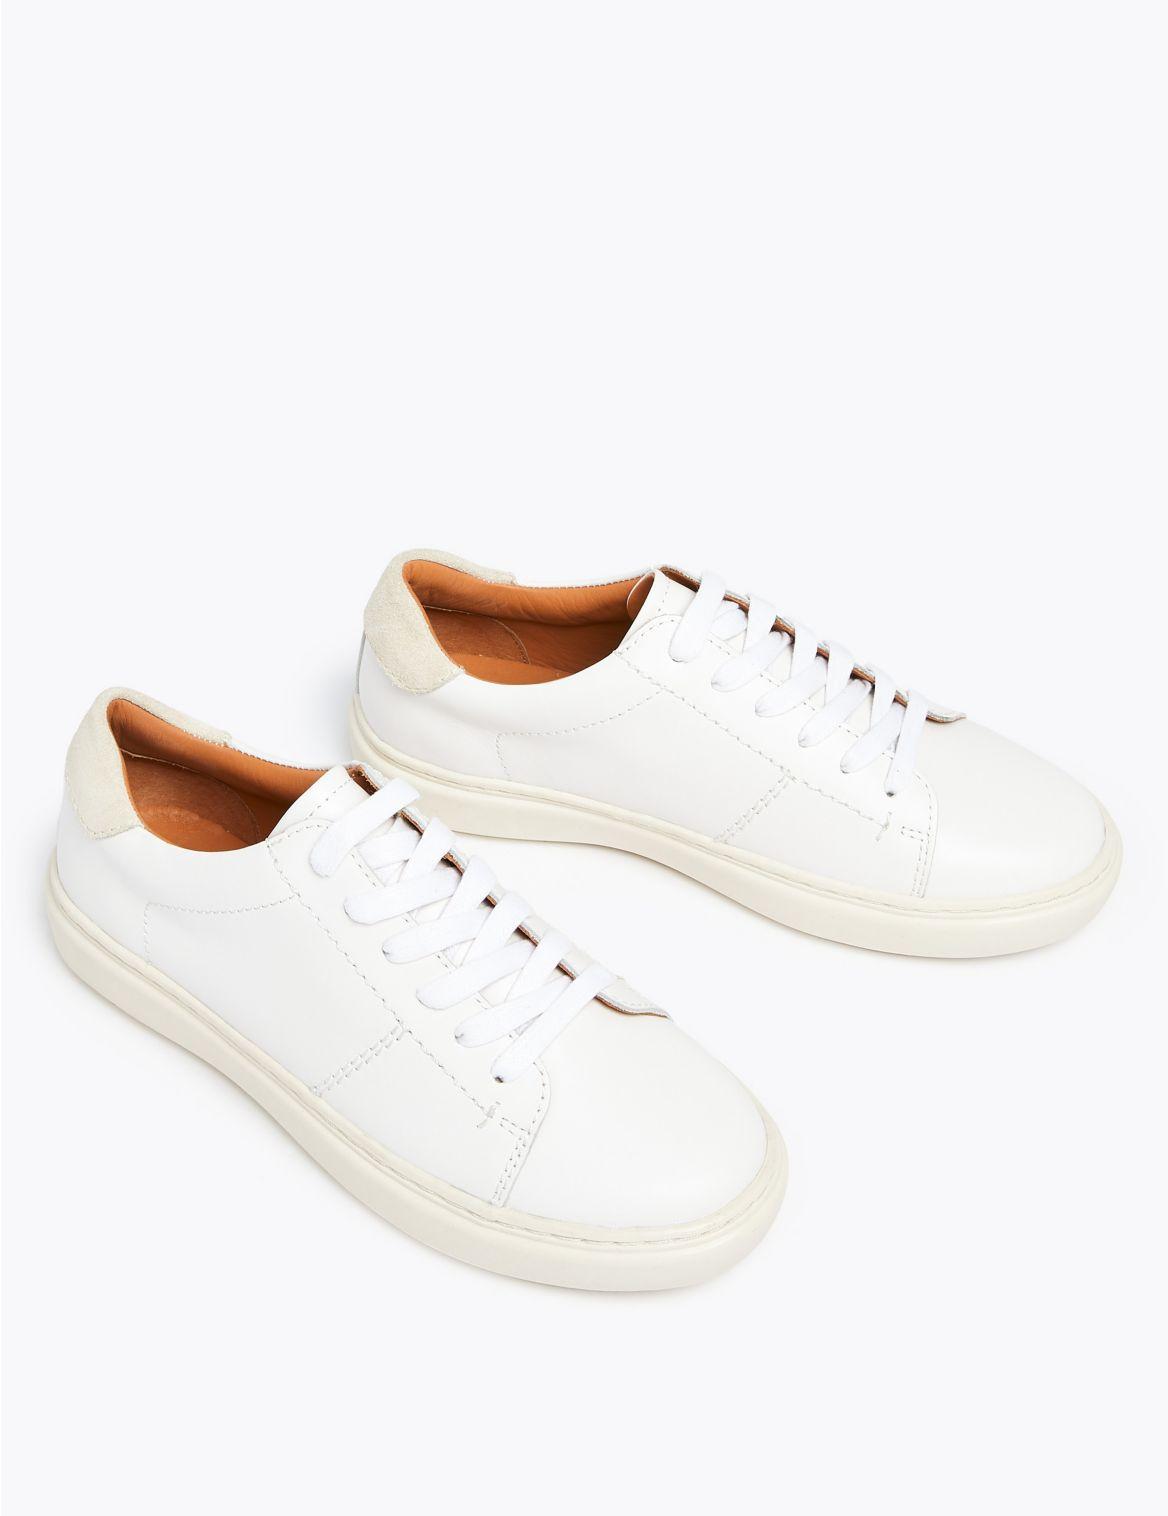 Marks & Spencer Leather Lace Up Trainers in White - Lyst